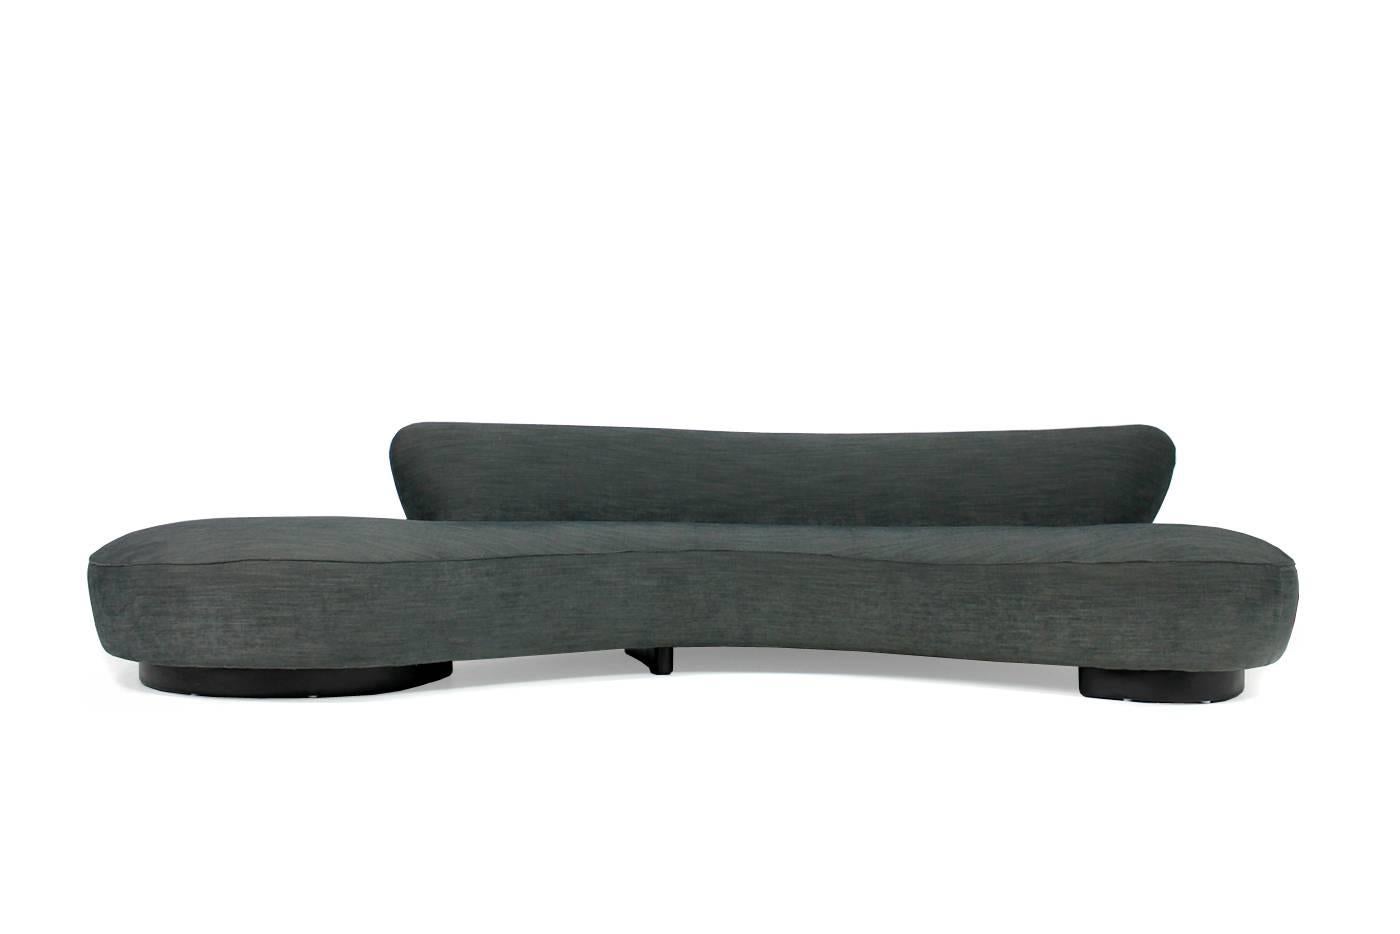 Beautiful and elegant Vladimir Kagan sofa model Serpentine.
This exemplar is the largest size and is available with the rare ottoman (on request).
Reupholstered in grey fabric.